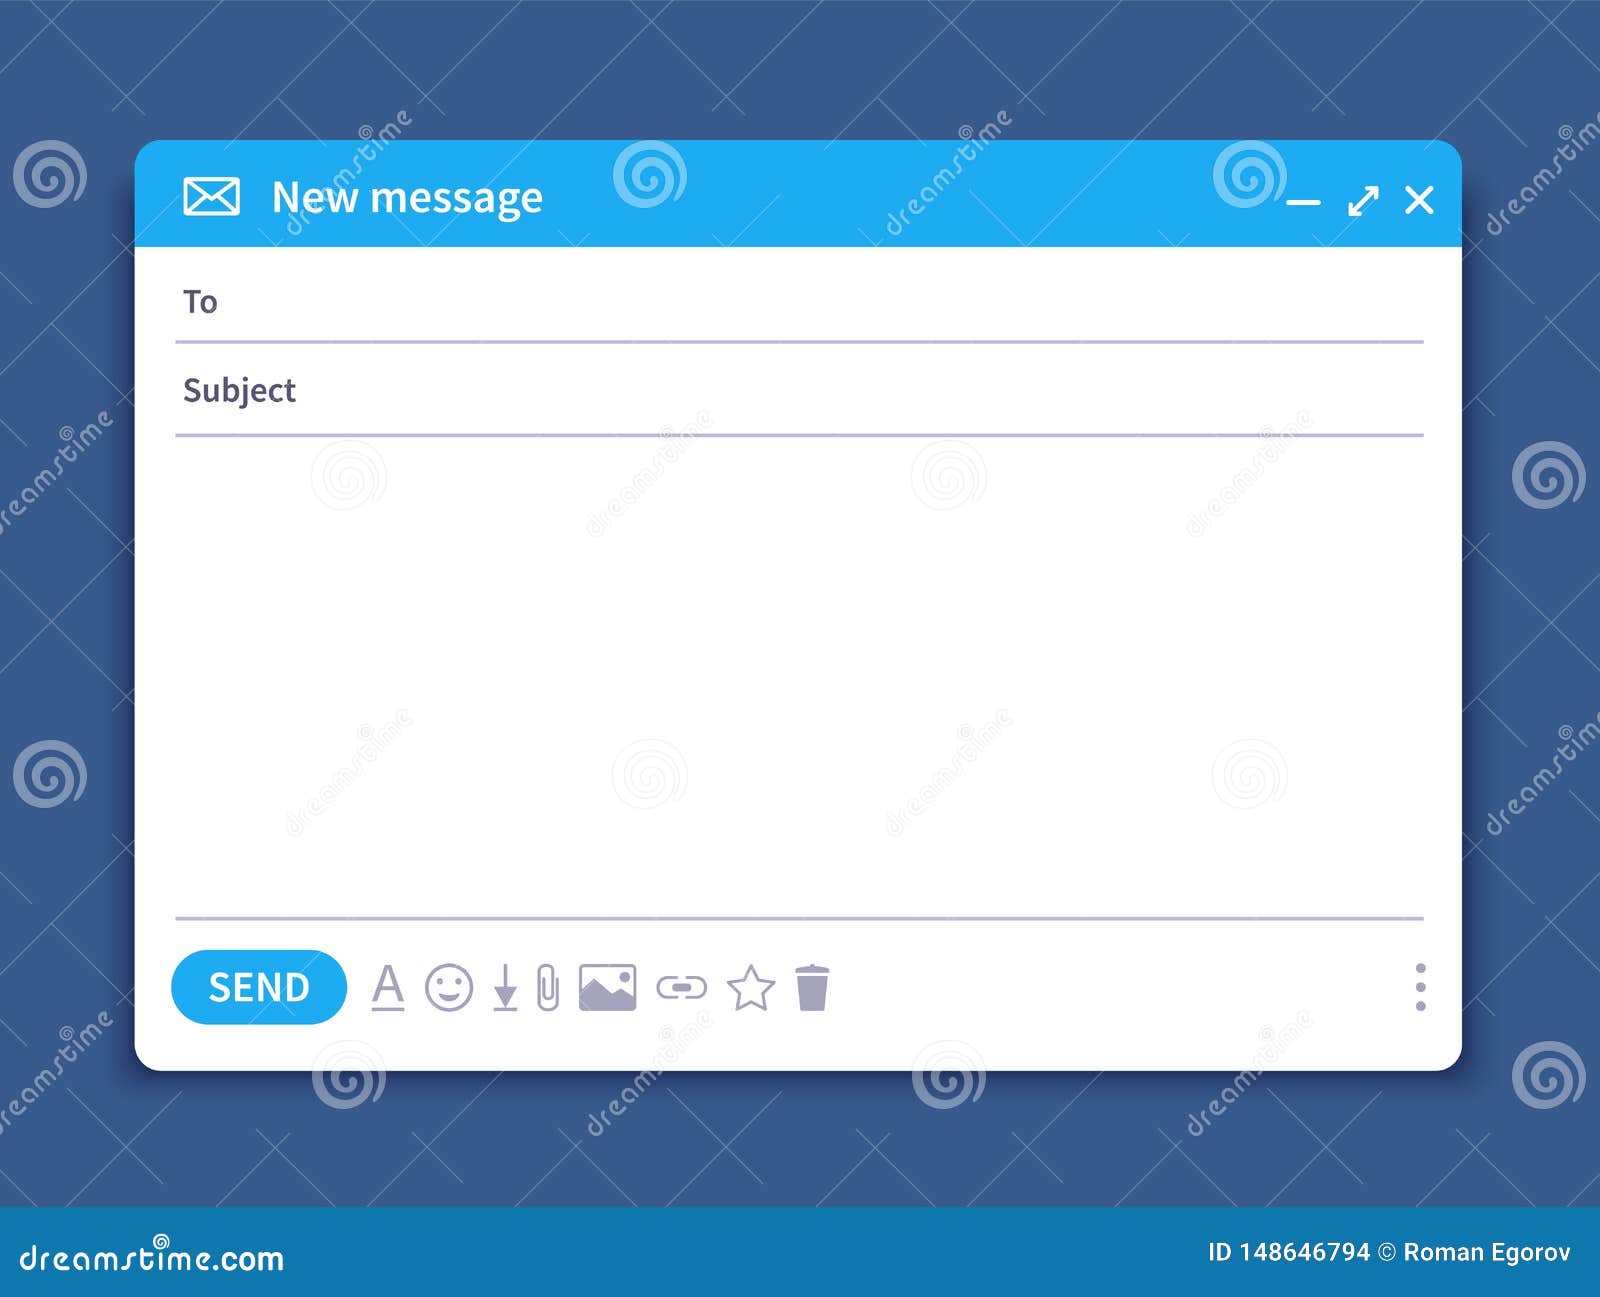 email interface. mail window template, internet message  frame, blank email ui .  email window